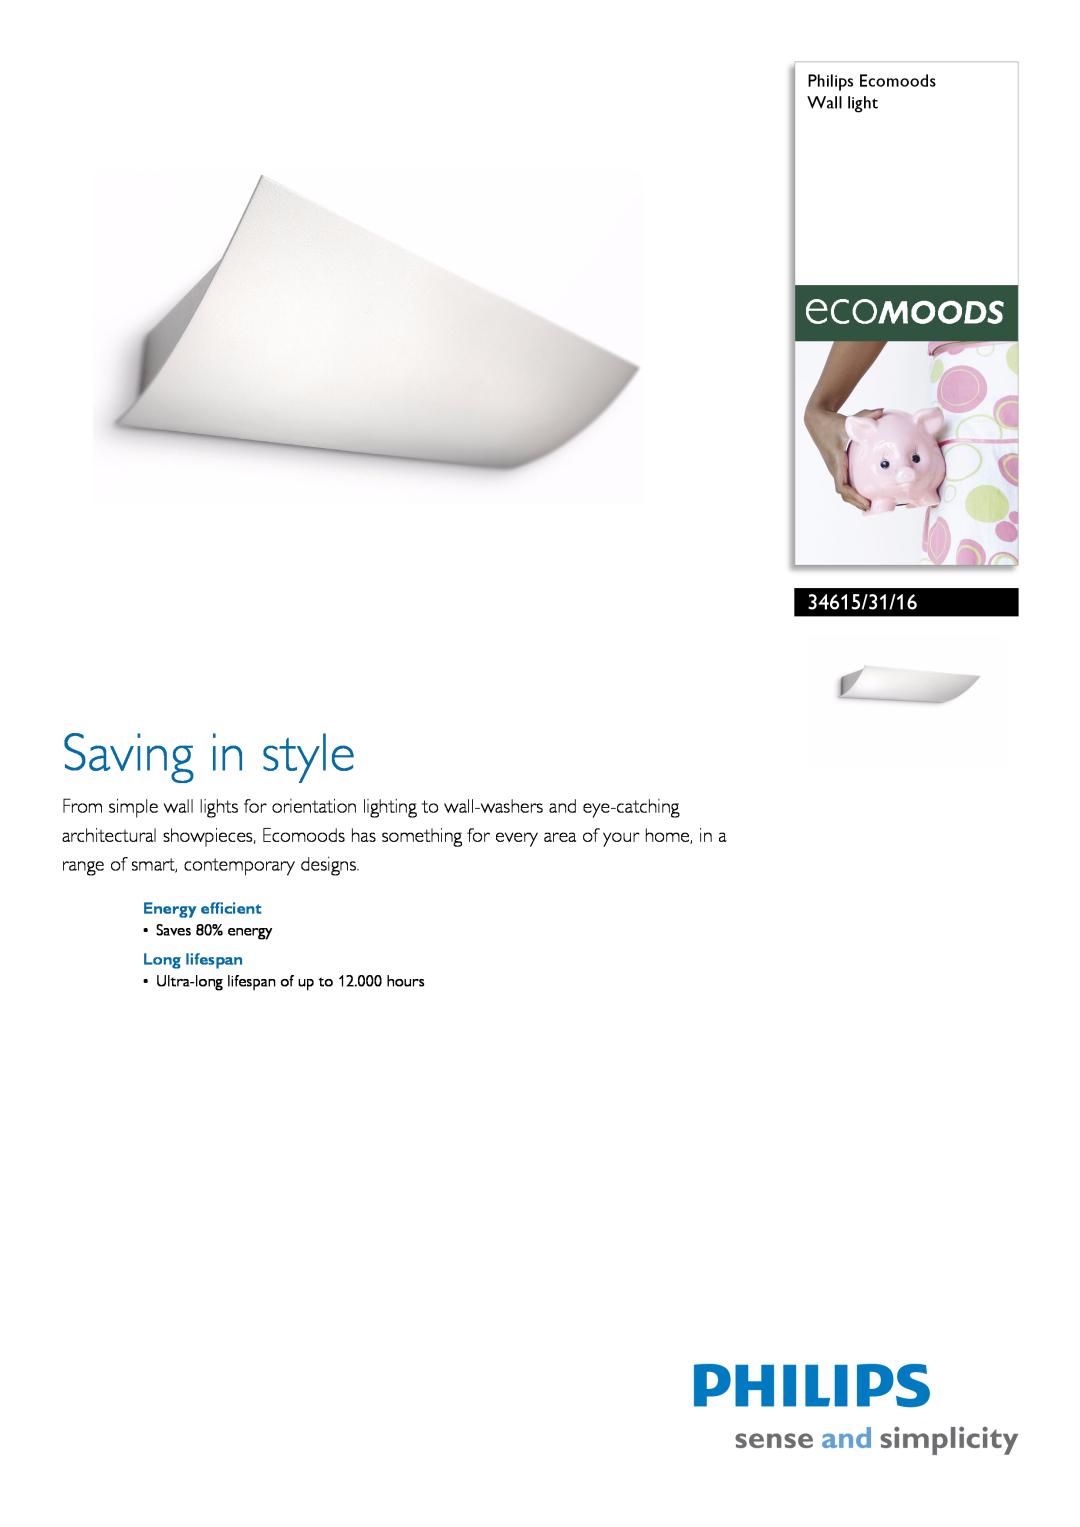 Philips 34615/31/16 manual Philips Ecomoods Wall light, Energy efficient, Long lifespan, Saving in style, Saves 80% energy 